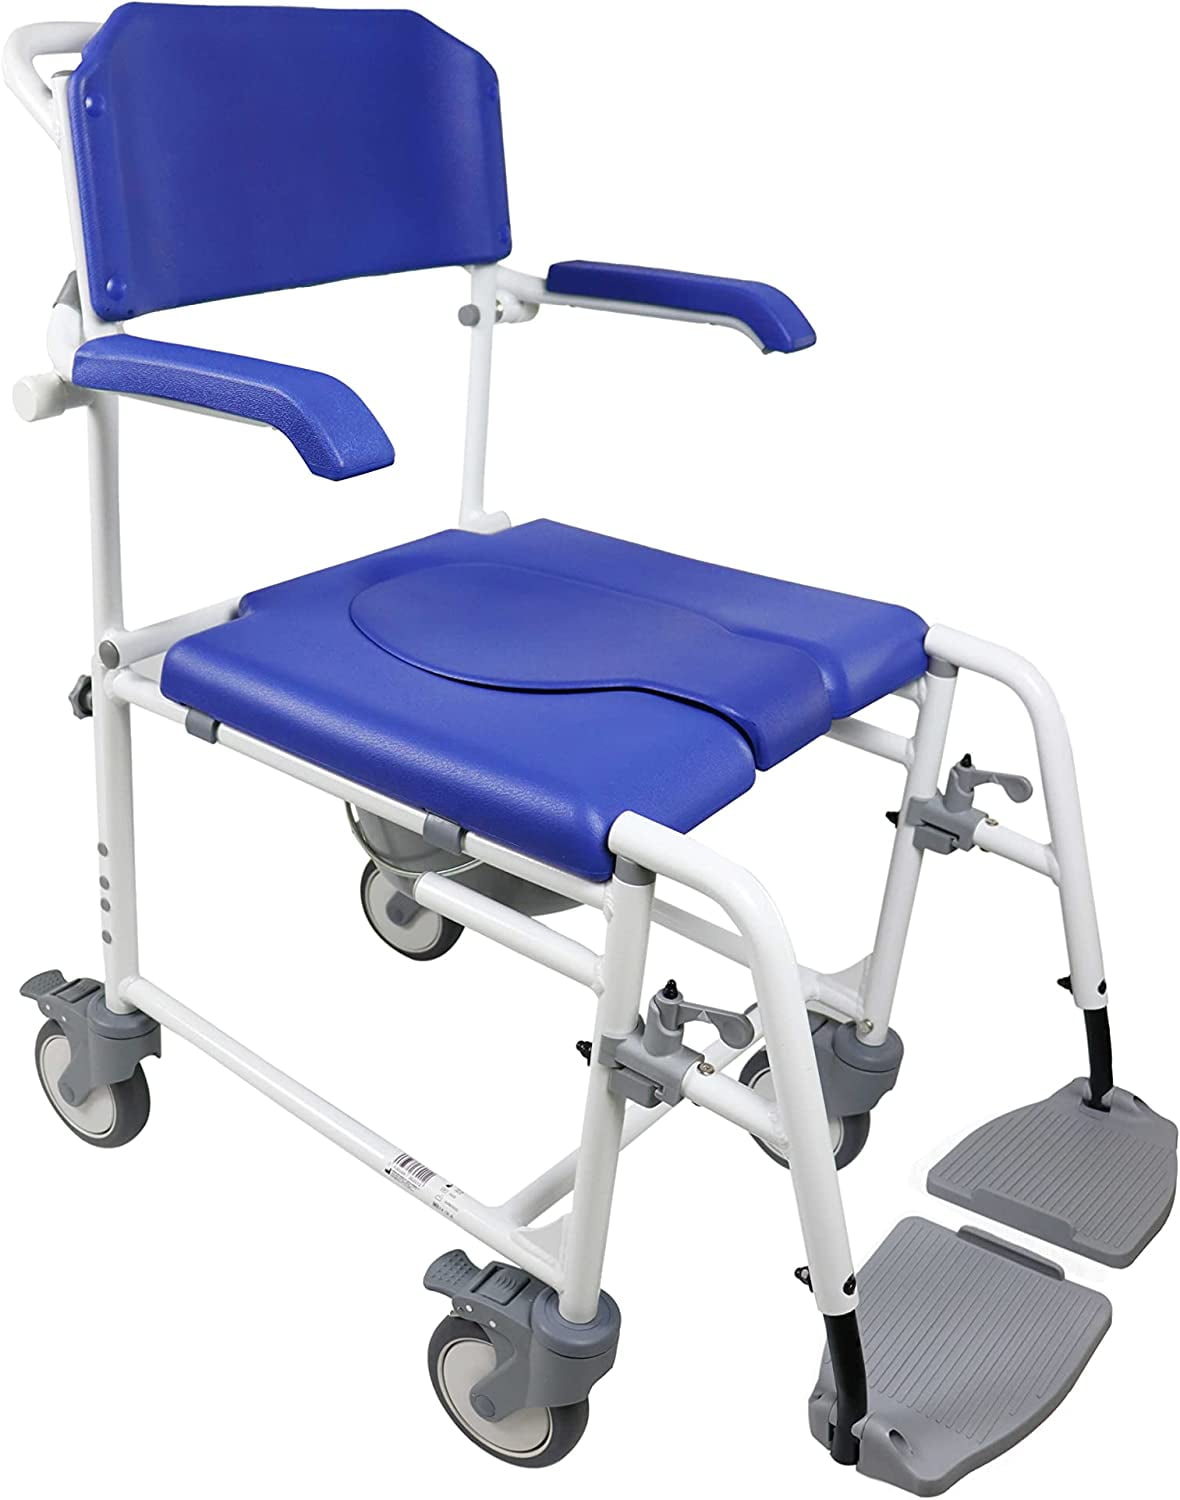 DMI 3-1 Rolling Shower Chair, Rolling Bathroom Wheelchair for Handicapped,  Elderly, Injured or Disabled & Transfer Board and Slide Board, FSA